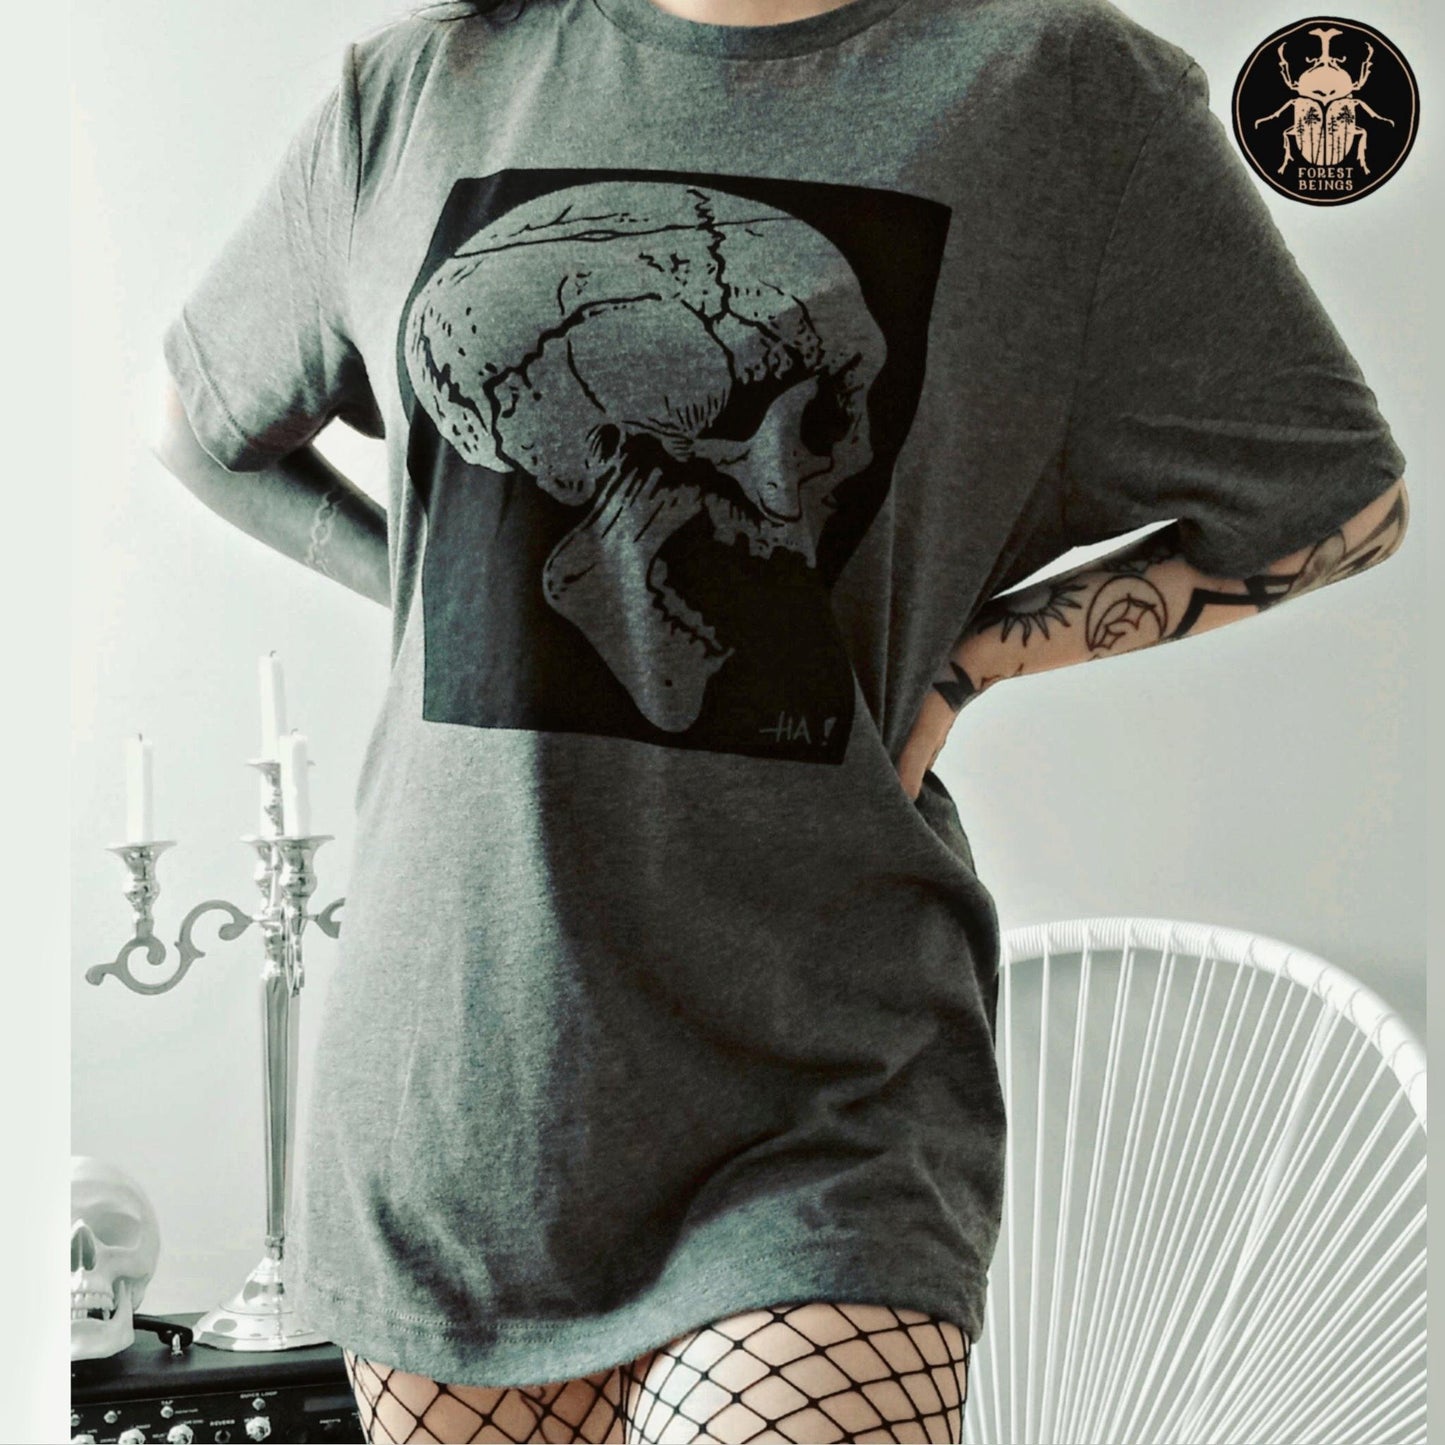 A sexy tattooed gothic girl wearing fishnet tights and an oversized grey gothic t-shirt. 